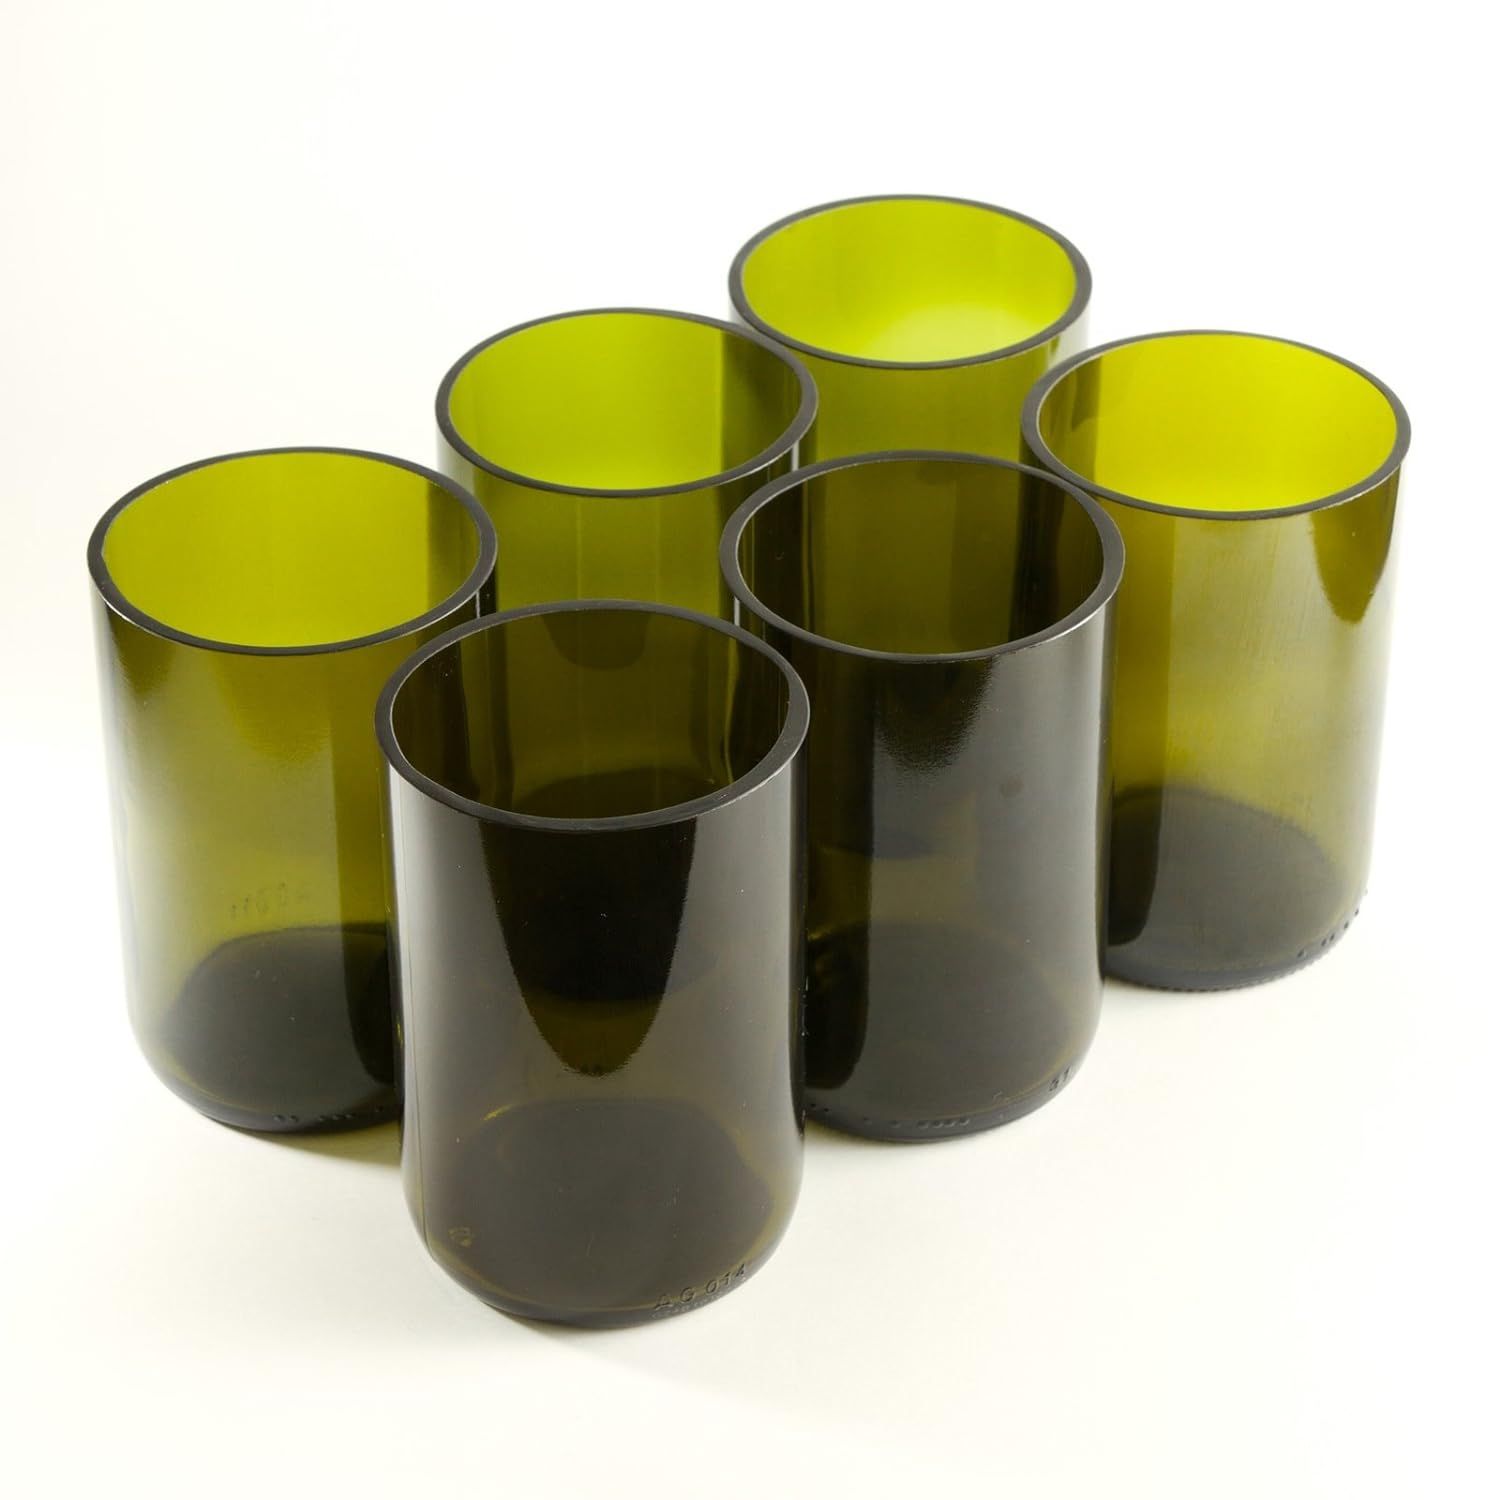 Wine bottle Glasses - Up-cycled Tumblers - Eco gifts - repurposed - Bar glasses | Amazon (US)